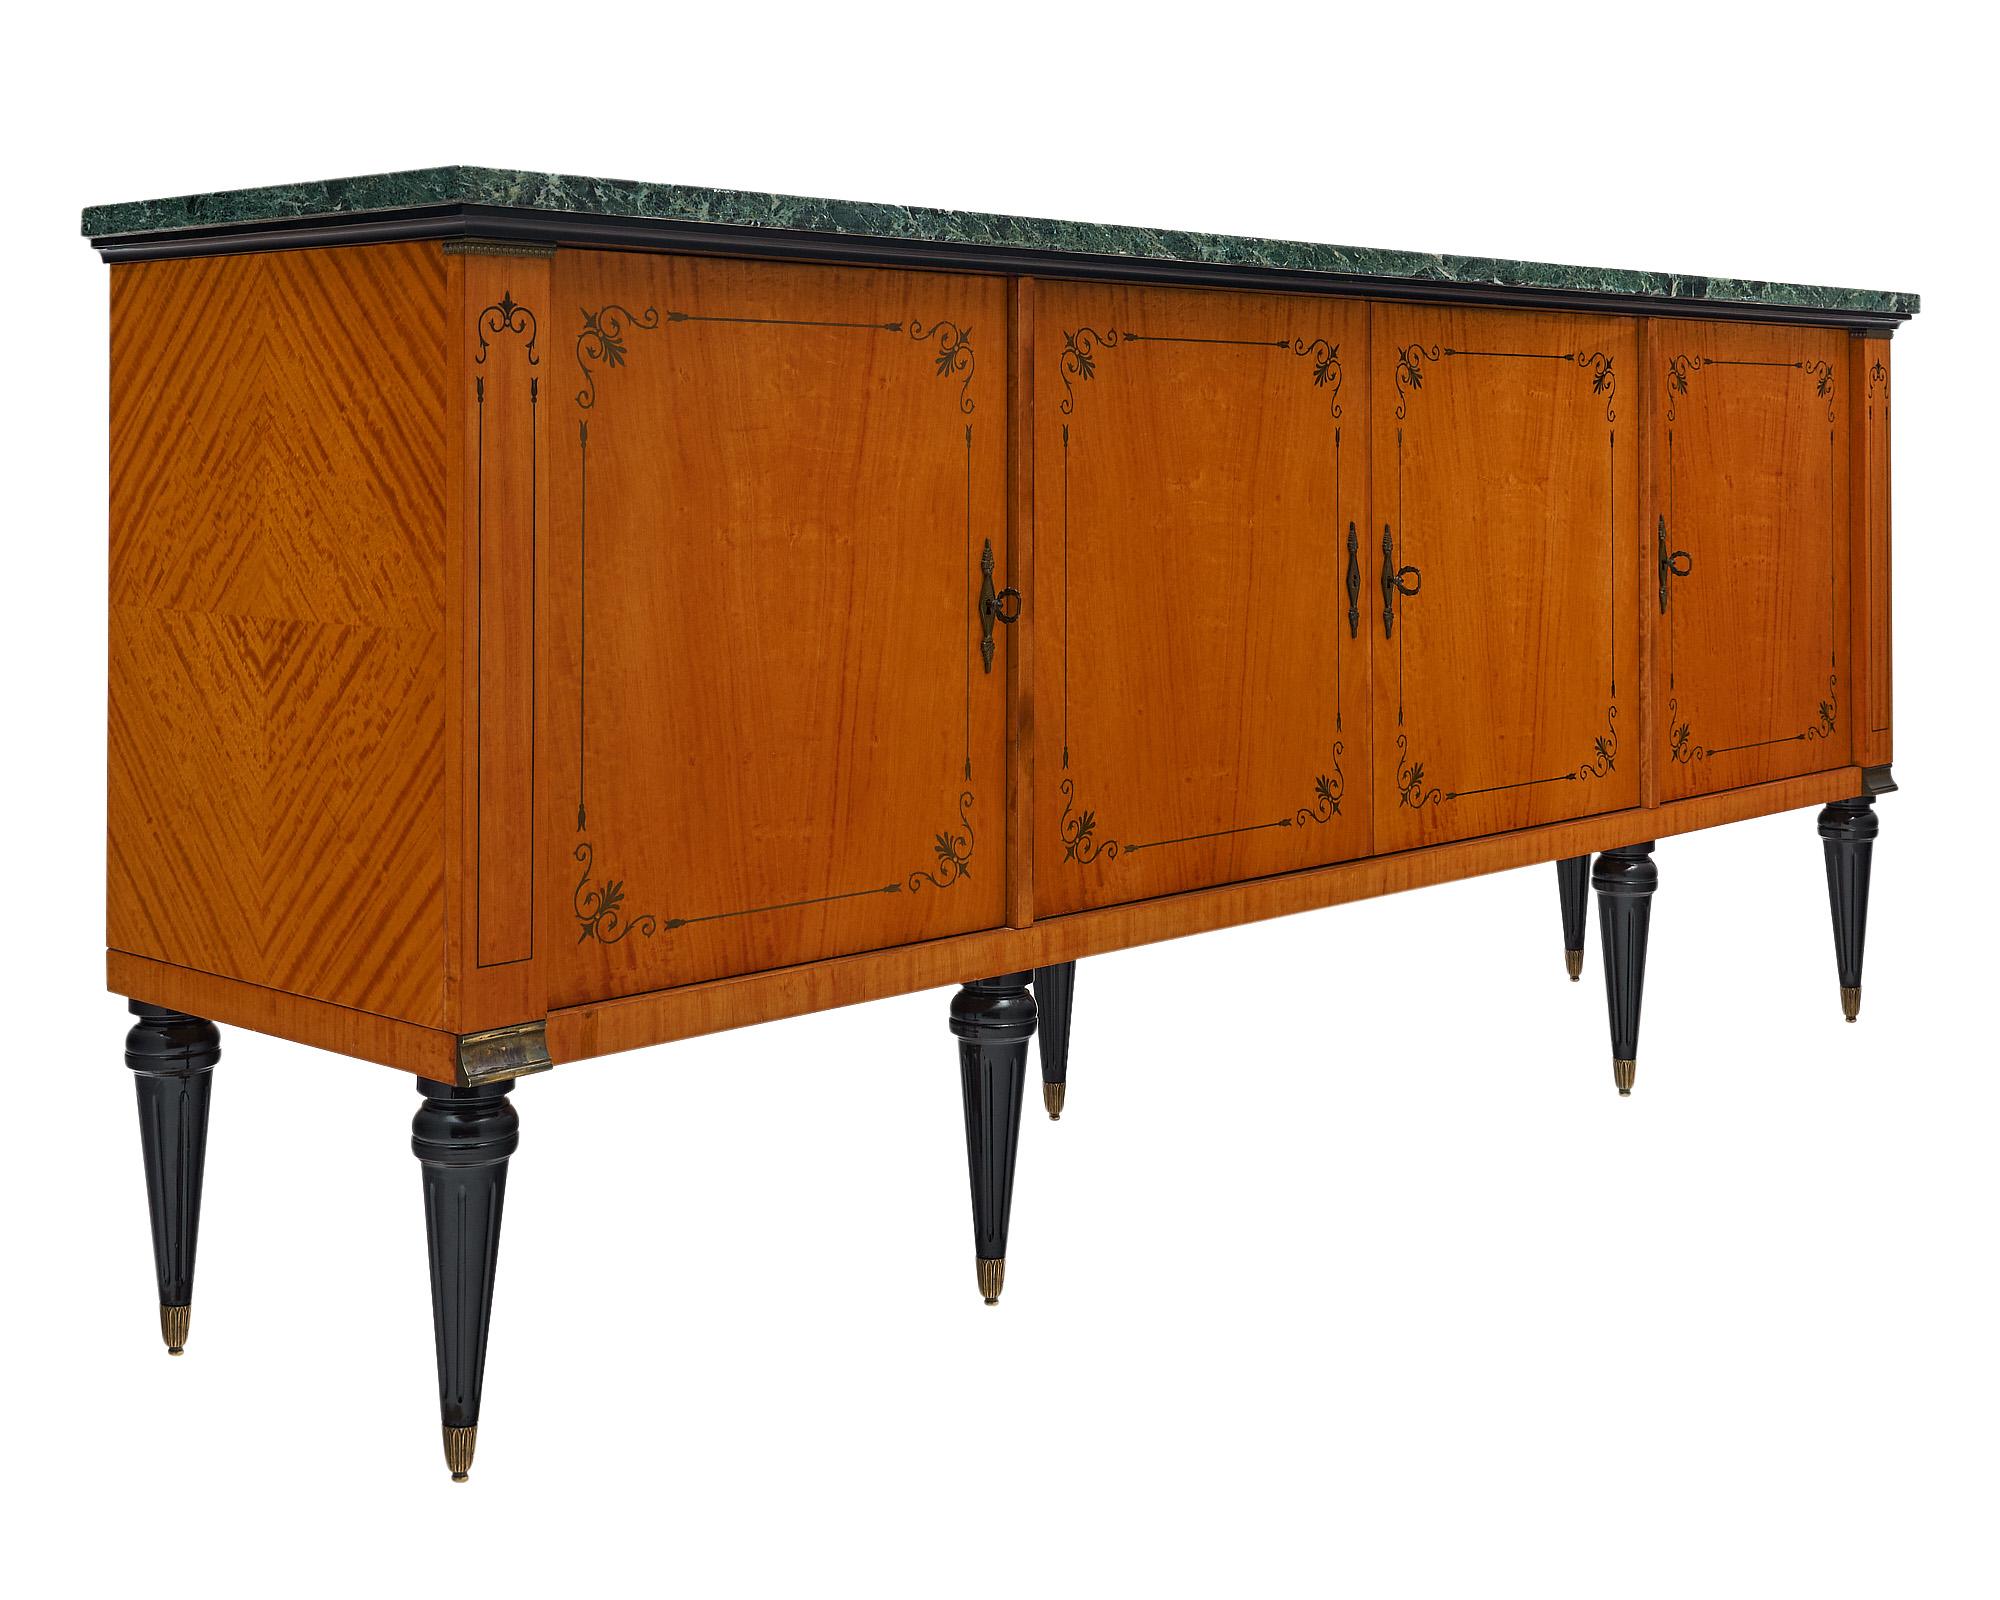 Buffet from France in the Modernist style with neoclassical lines. This piece boasts a striking flamed sycamore with a striking inlay on the four doors inlayed wit ebony. This expertly crafted enfilade is supported by ebonized, tapered legs. The